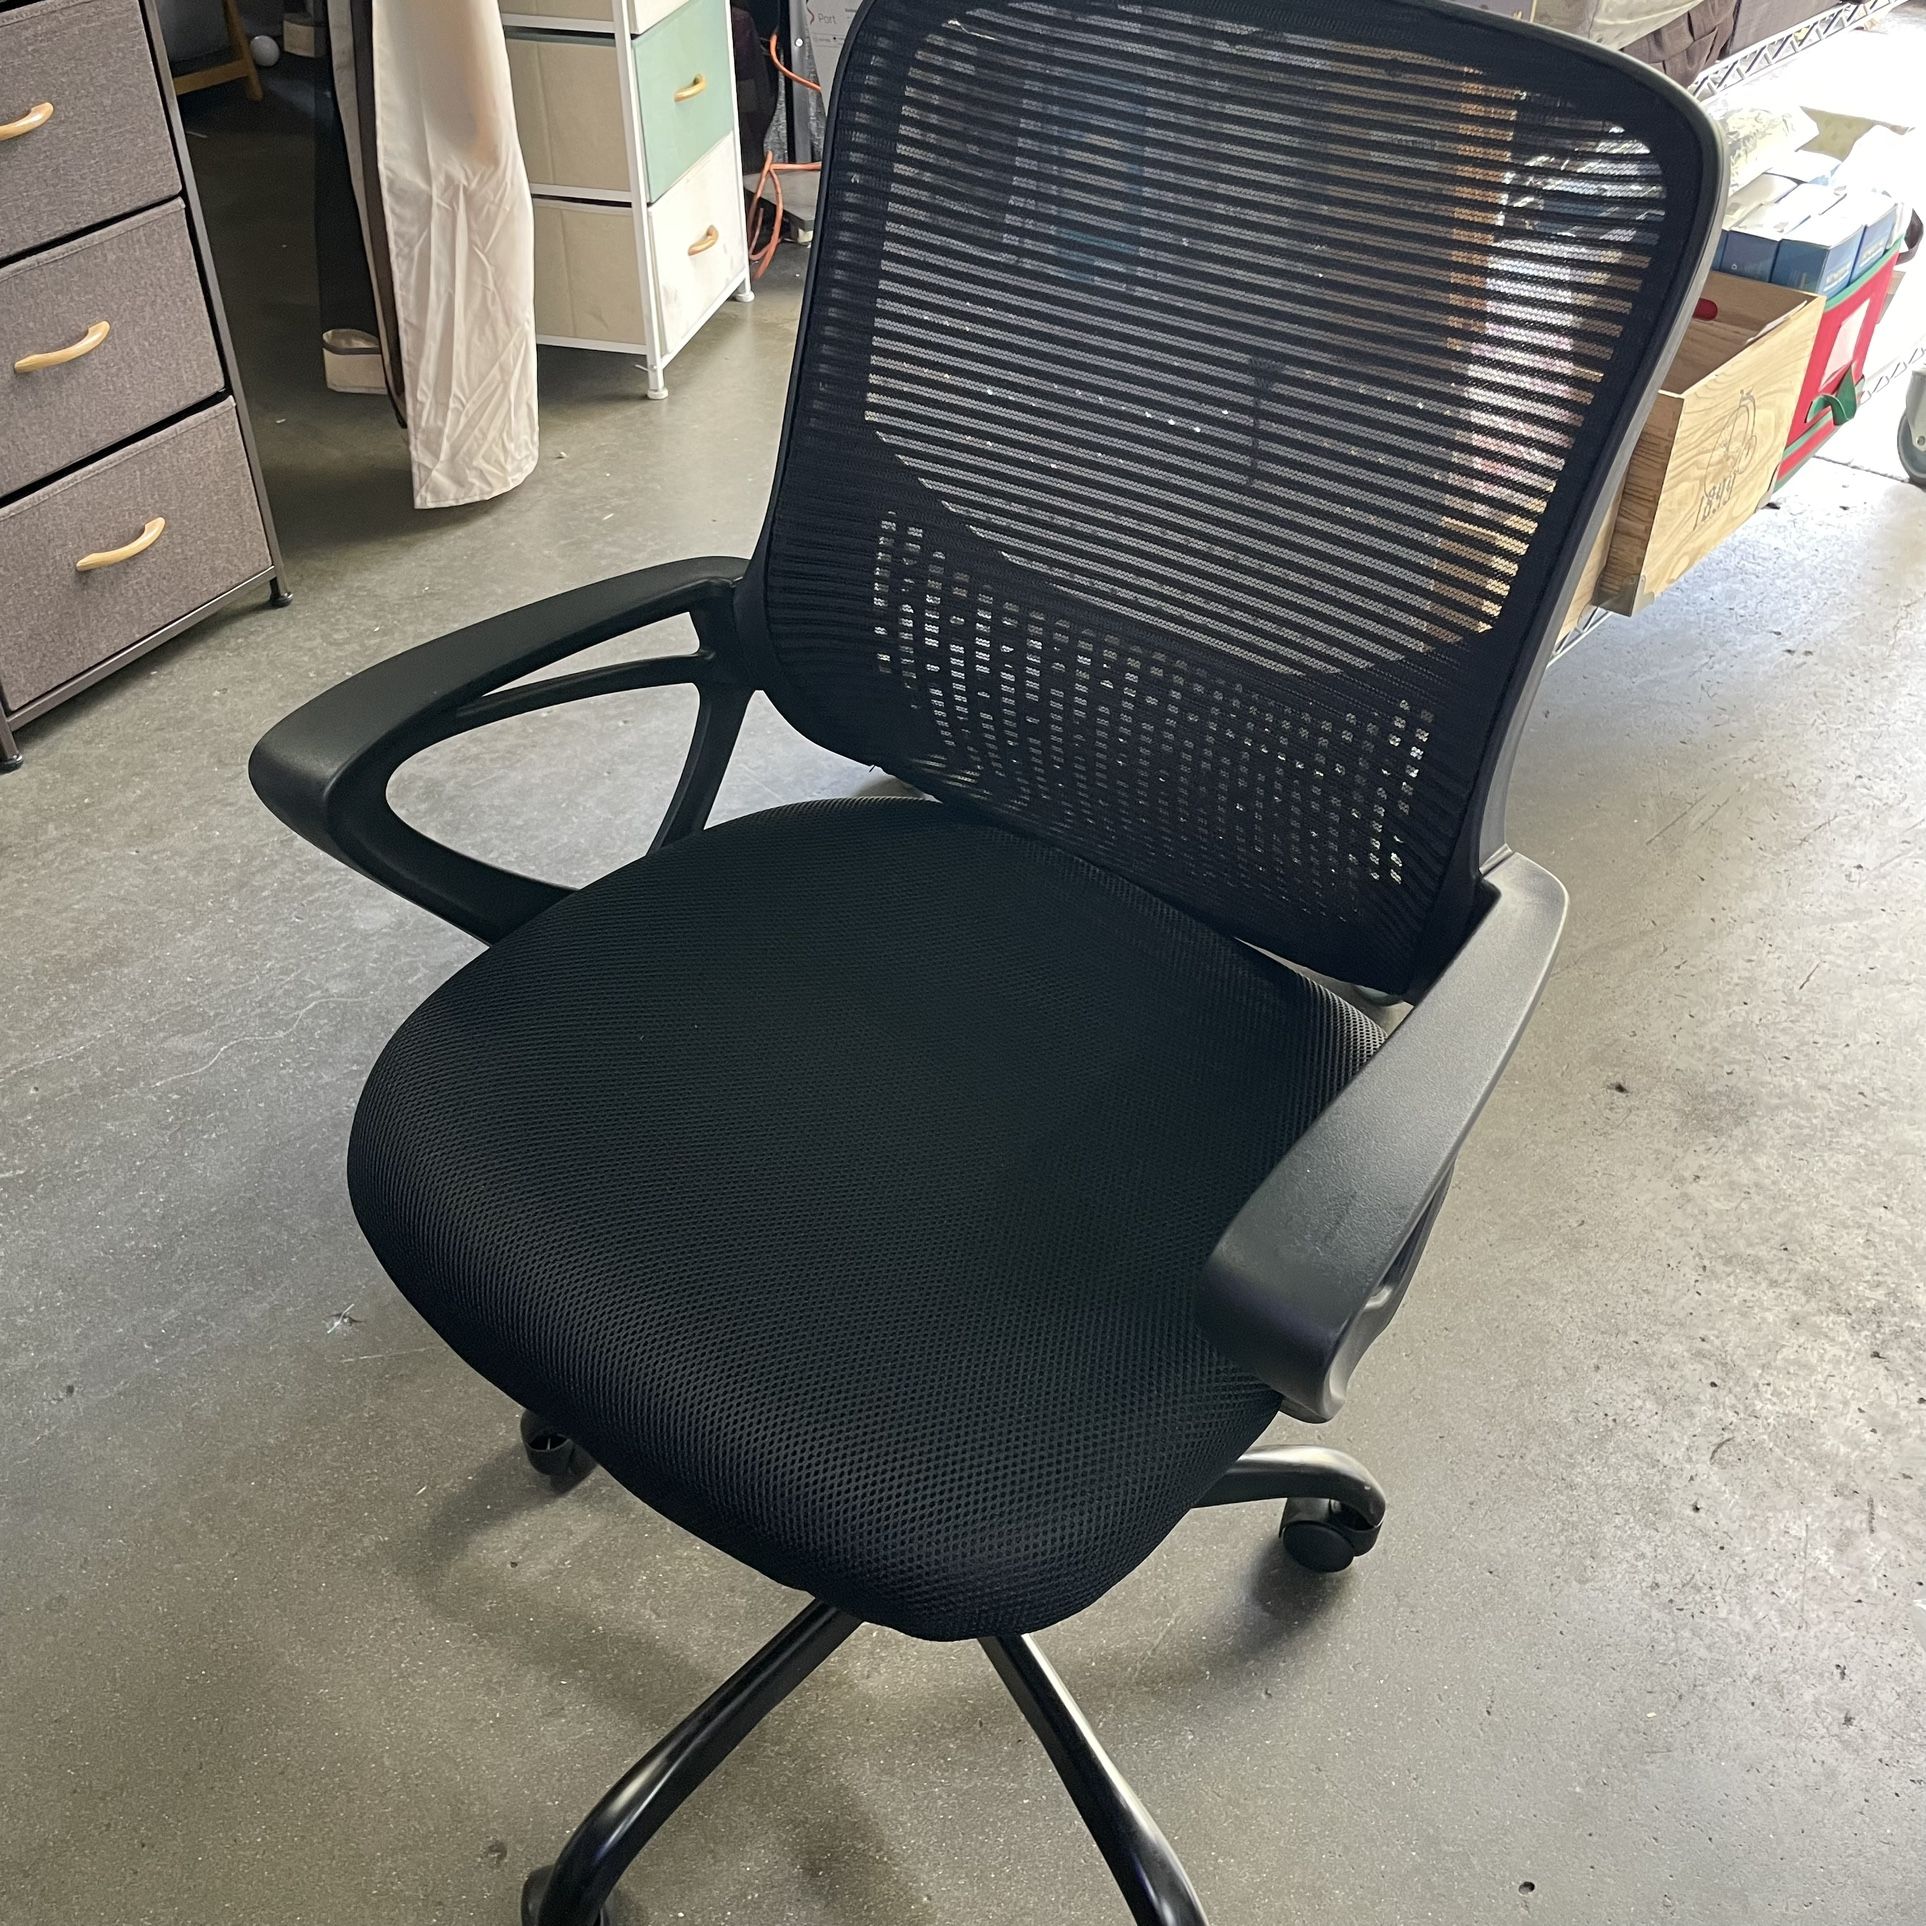 Computer Chair Ergonomic Office Chair Mid-Back Desk Chair w/Armrest and Swivel wheels